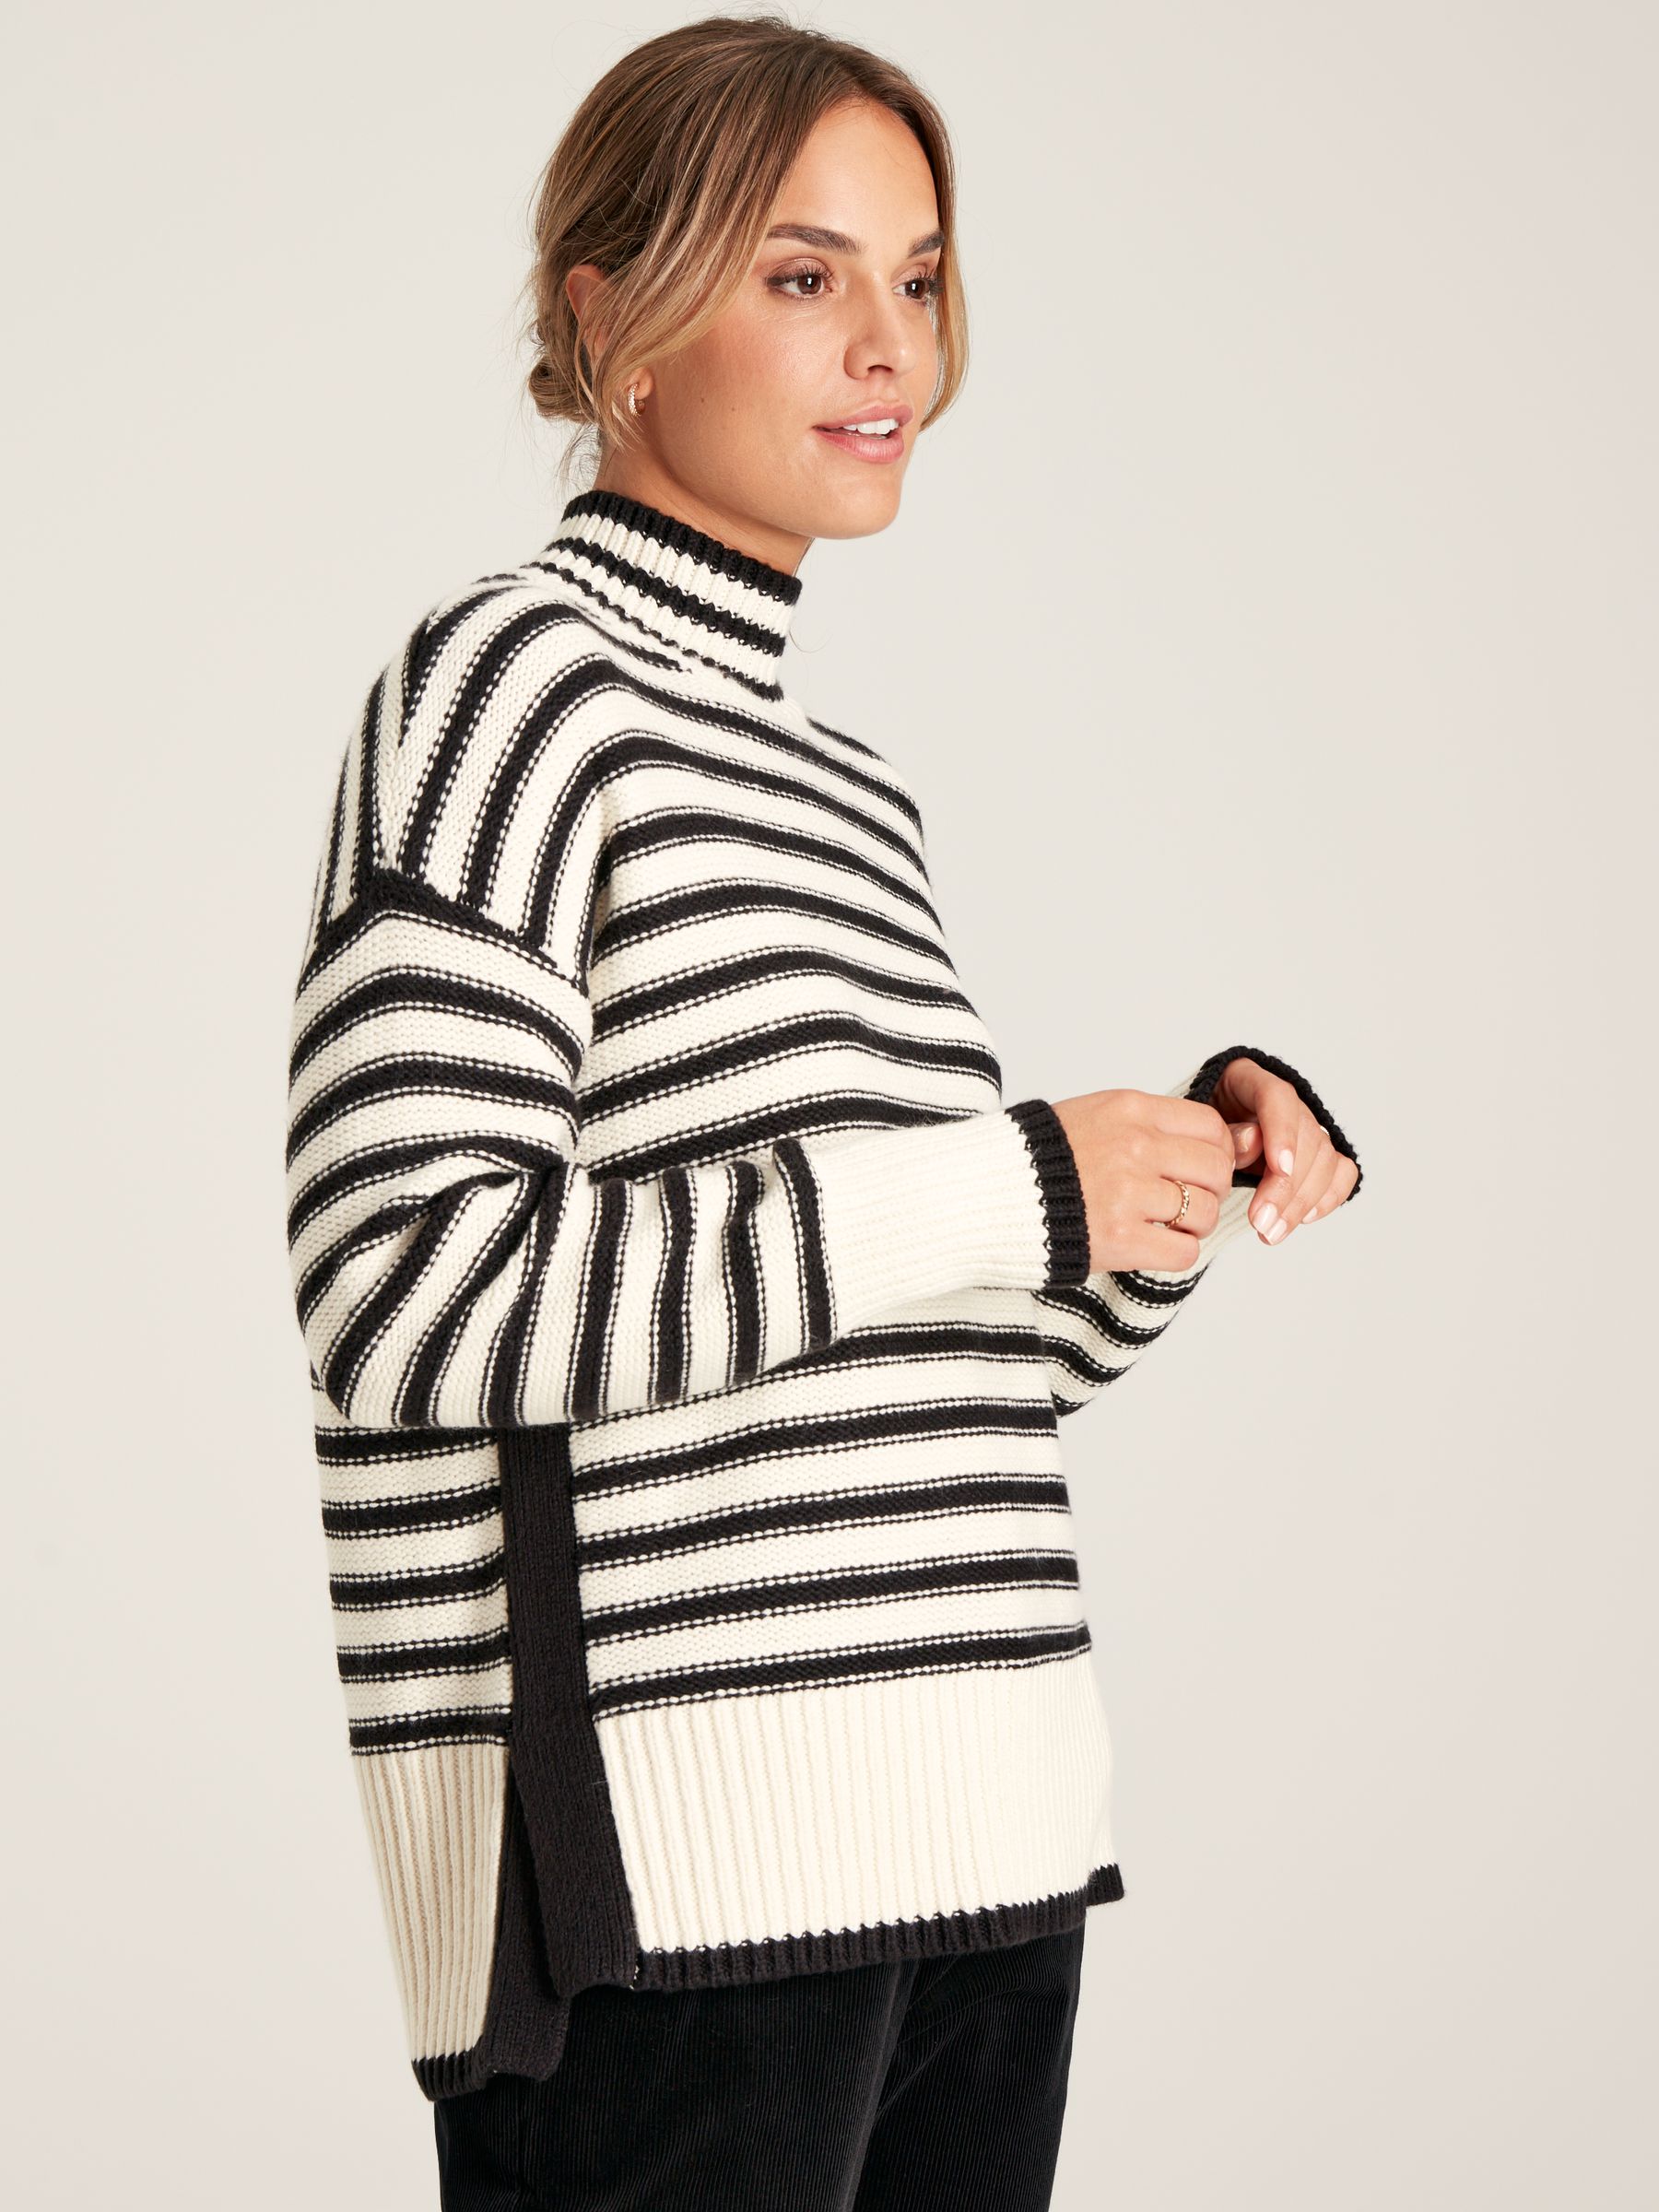 Buy Joules Tandie Striped High Neck Jumper from the Joules online shop